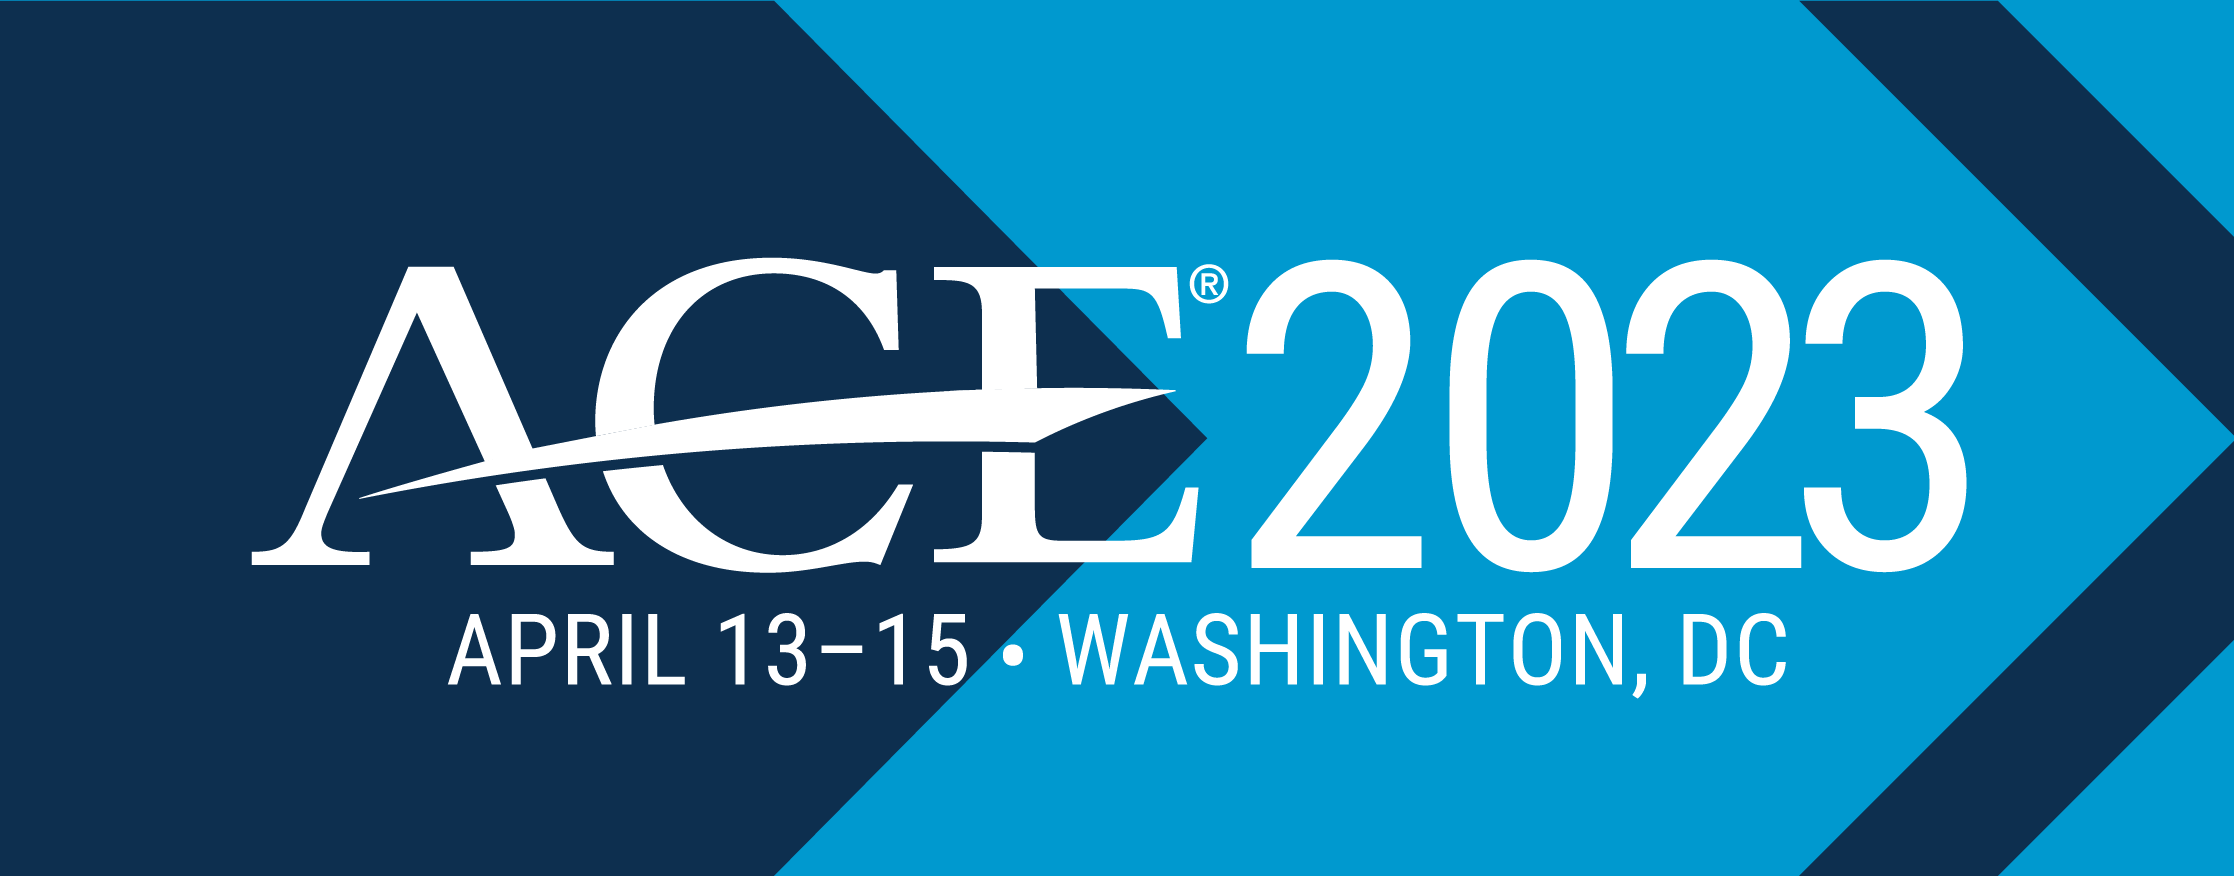 Efforts to Reimagine the Carnegie Classifications Explored at ACE2023